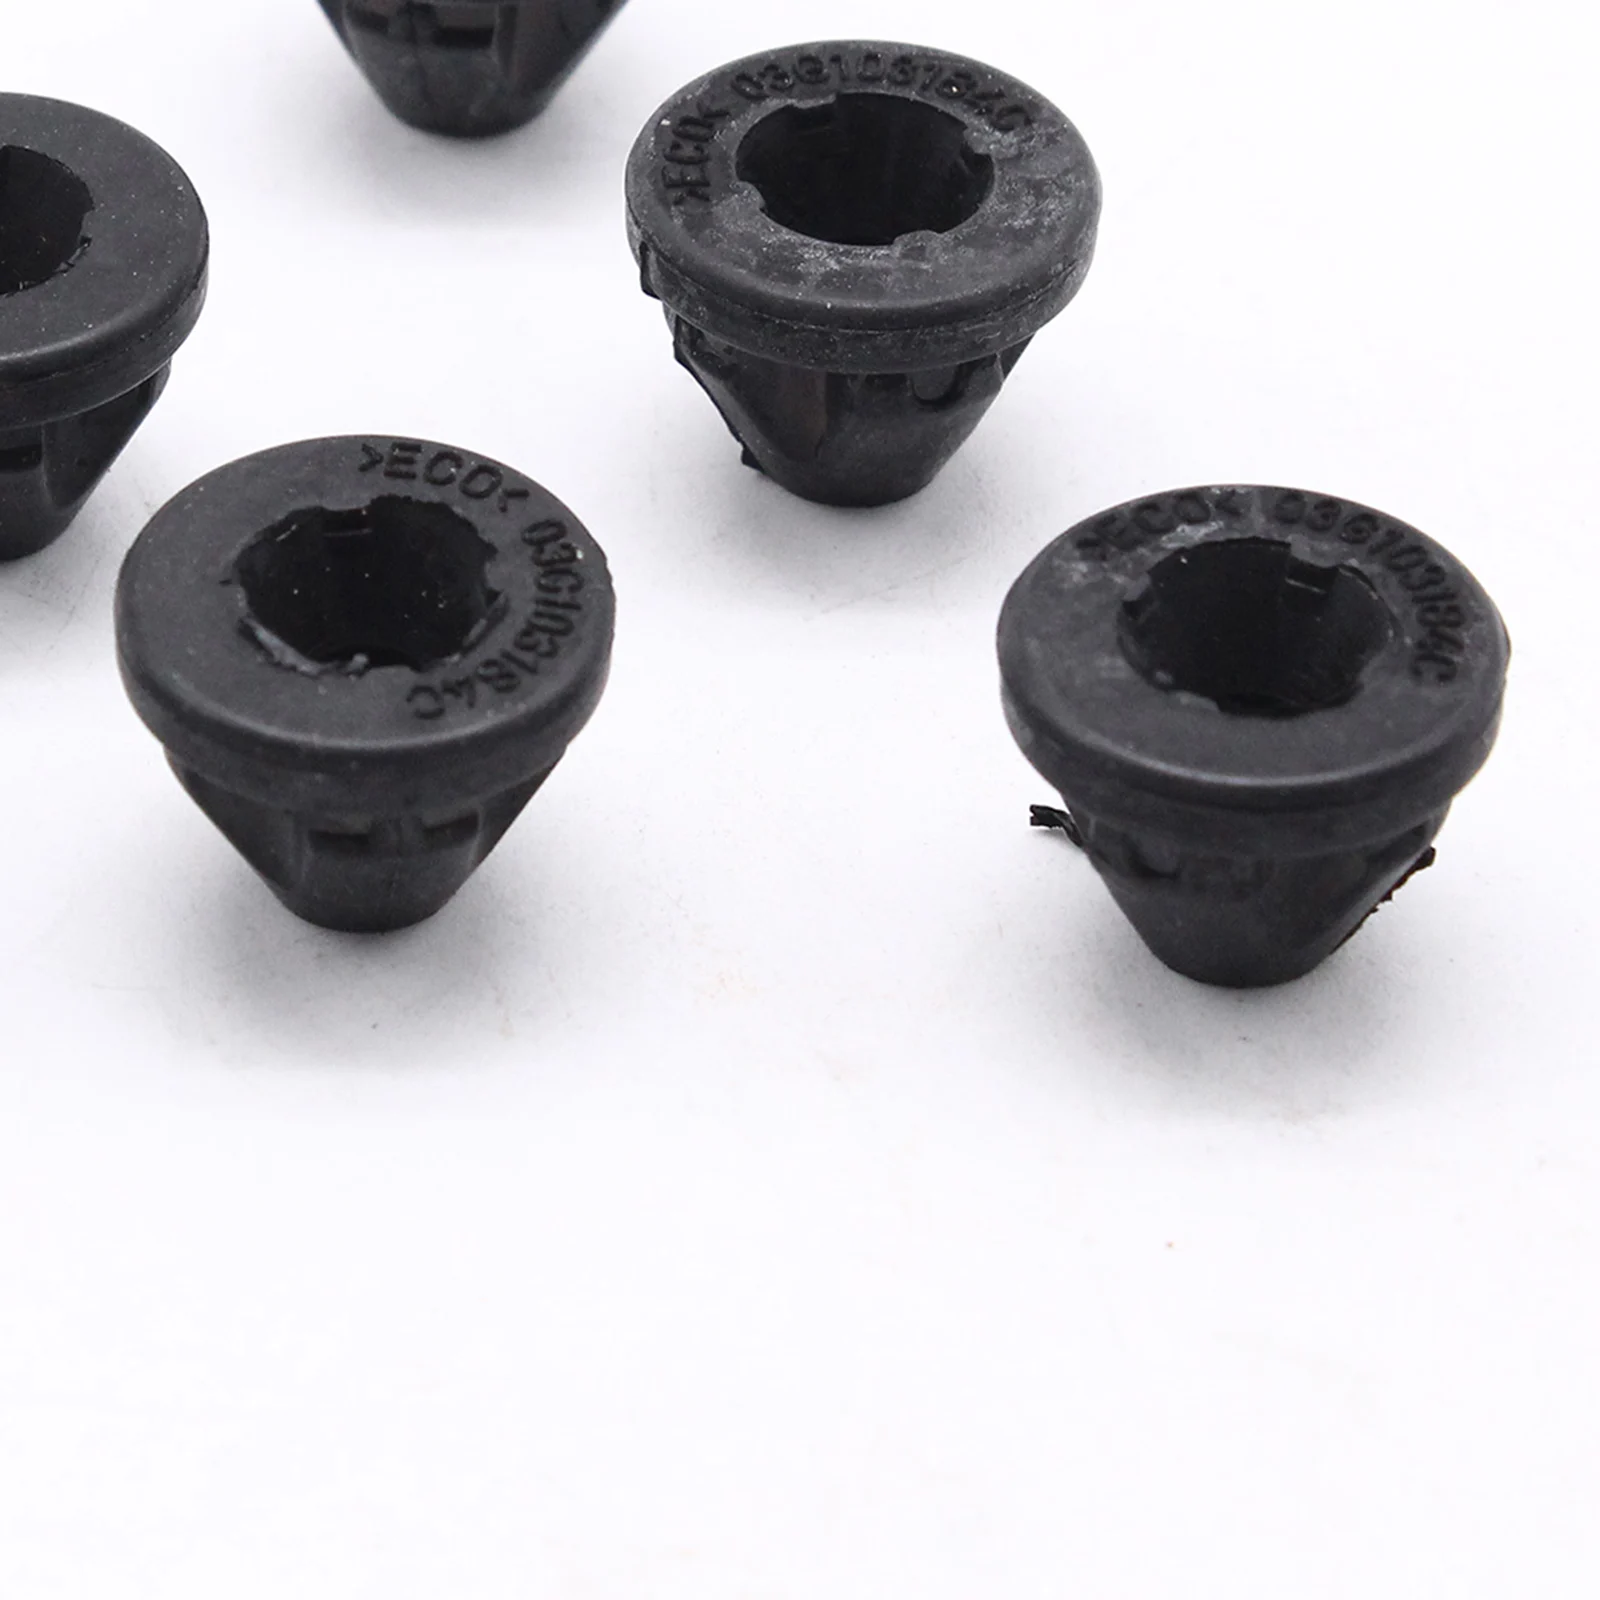 Set of 5 Car Engine Cover Grommets Washer Rubber Durable 03G 103 184 Black